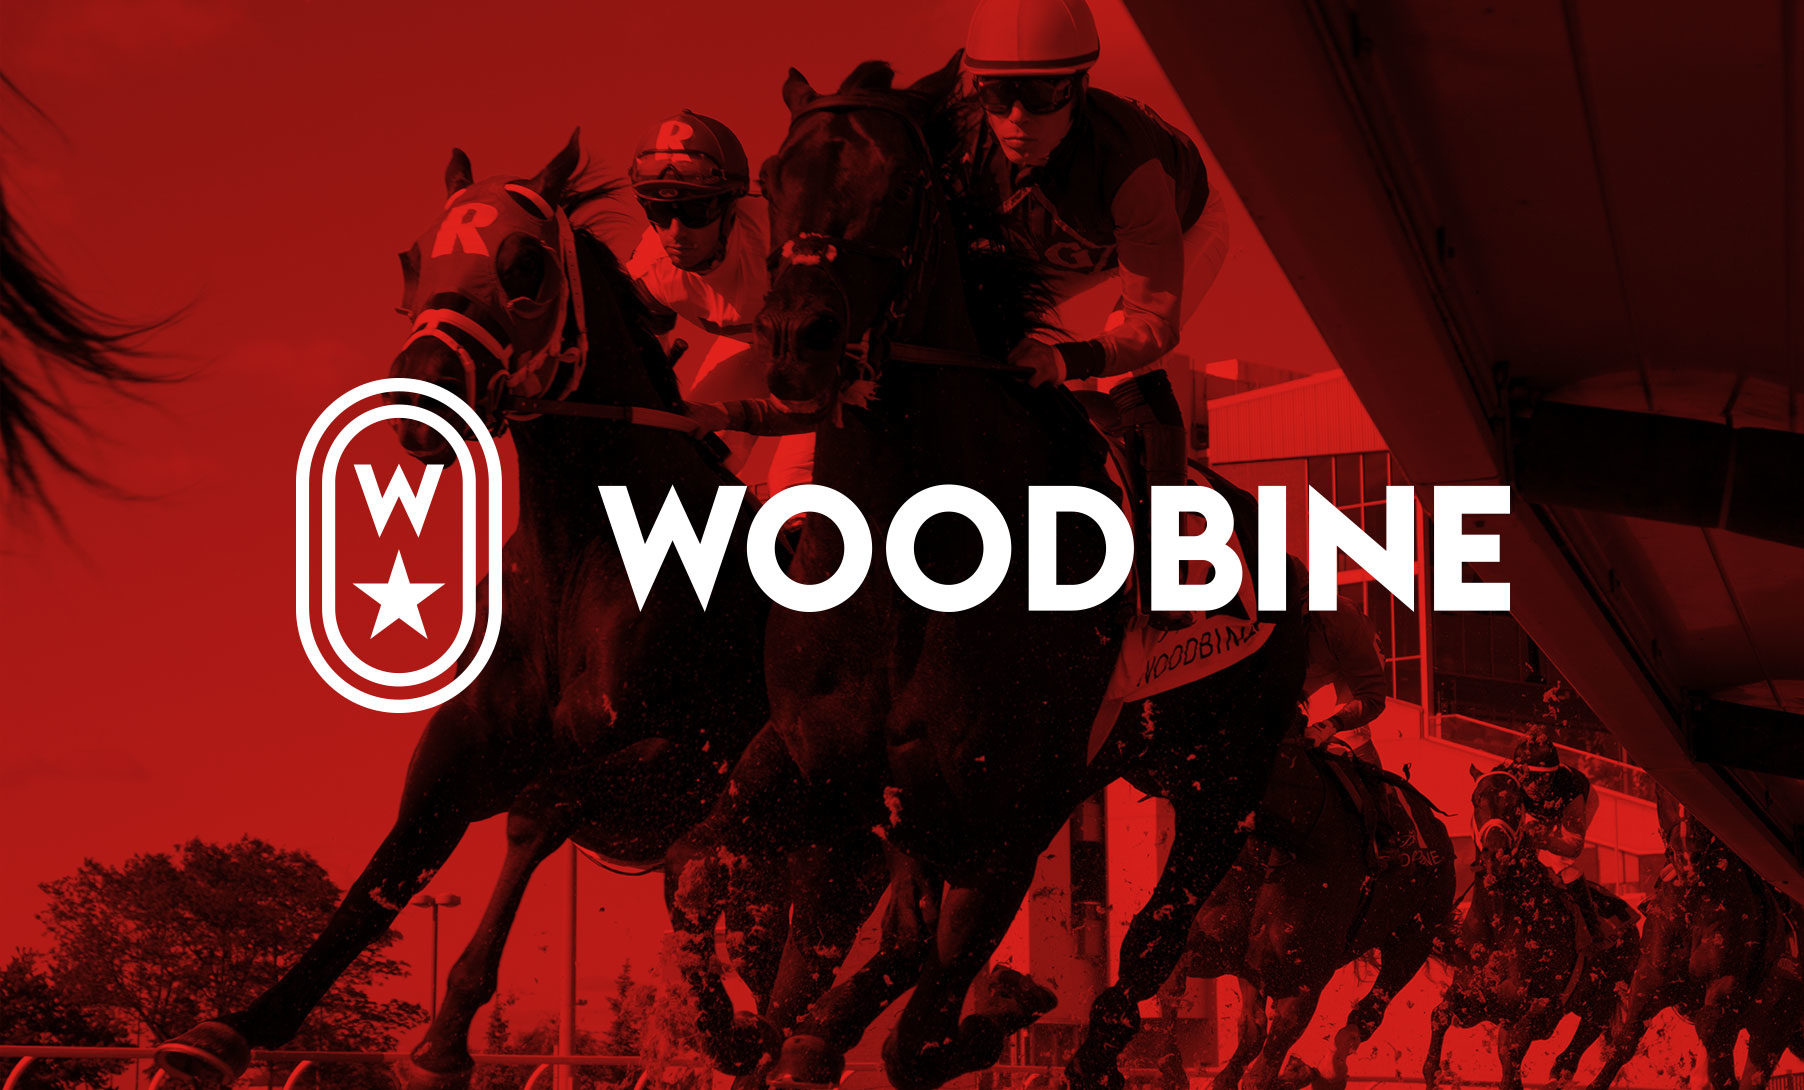 Christine Magee Appointed Chair of Woodbine Entertainment’s Board of Directors